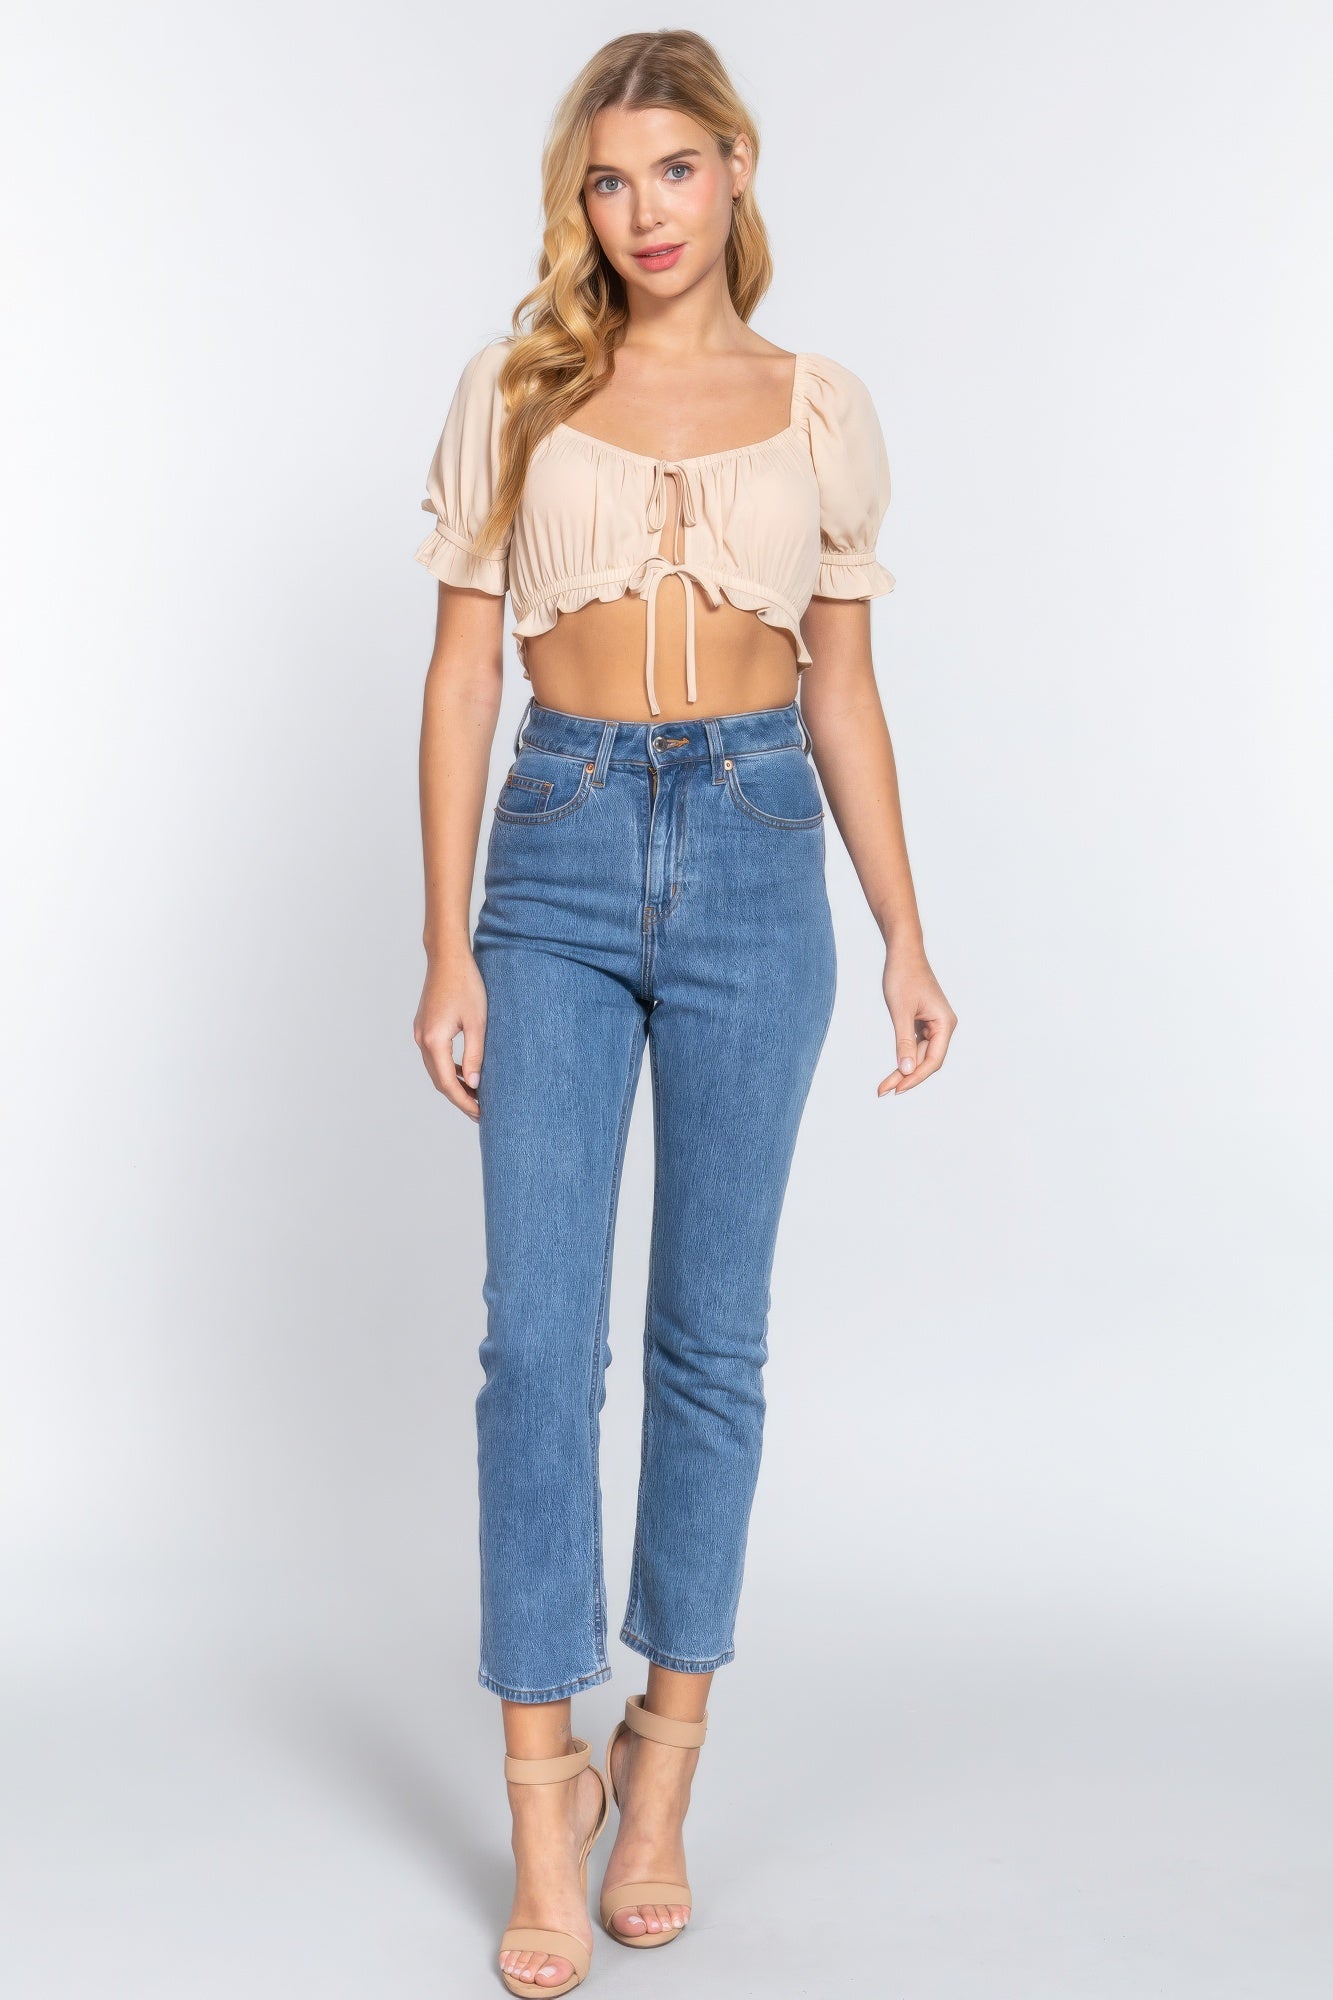 THE IVY Short Slv Print Crop Woven Top